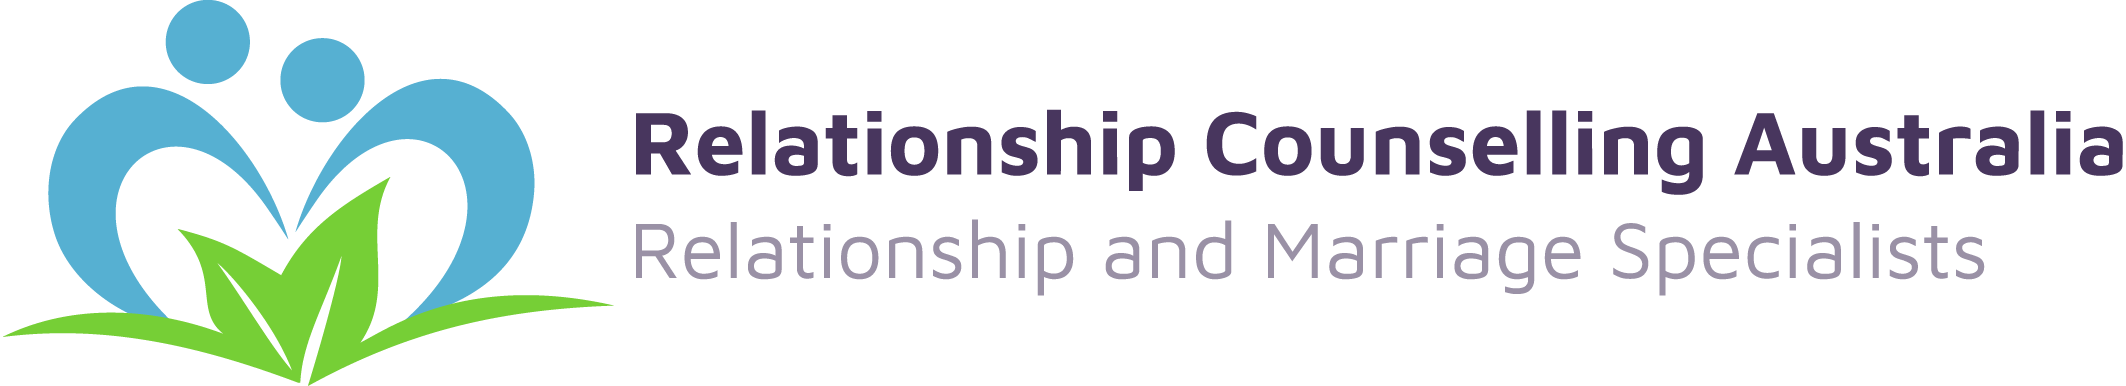 Relationship Counselling Australia